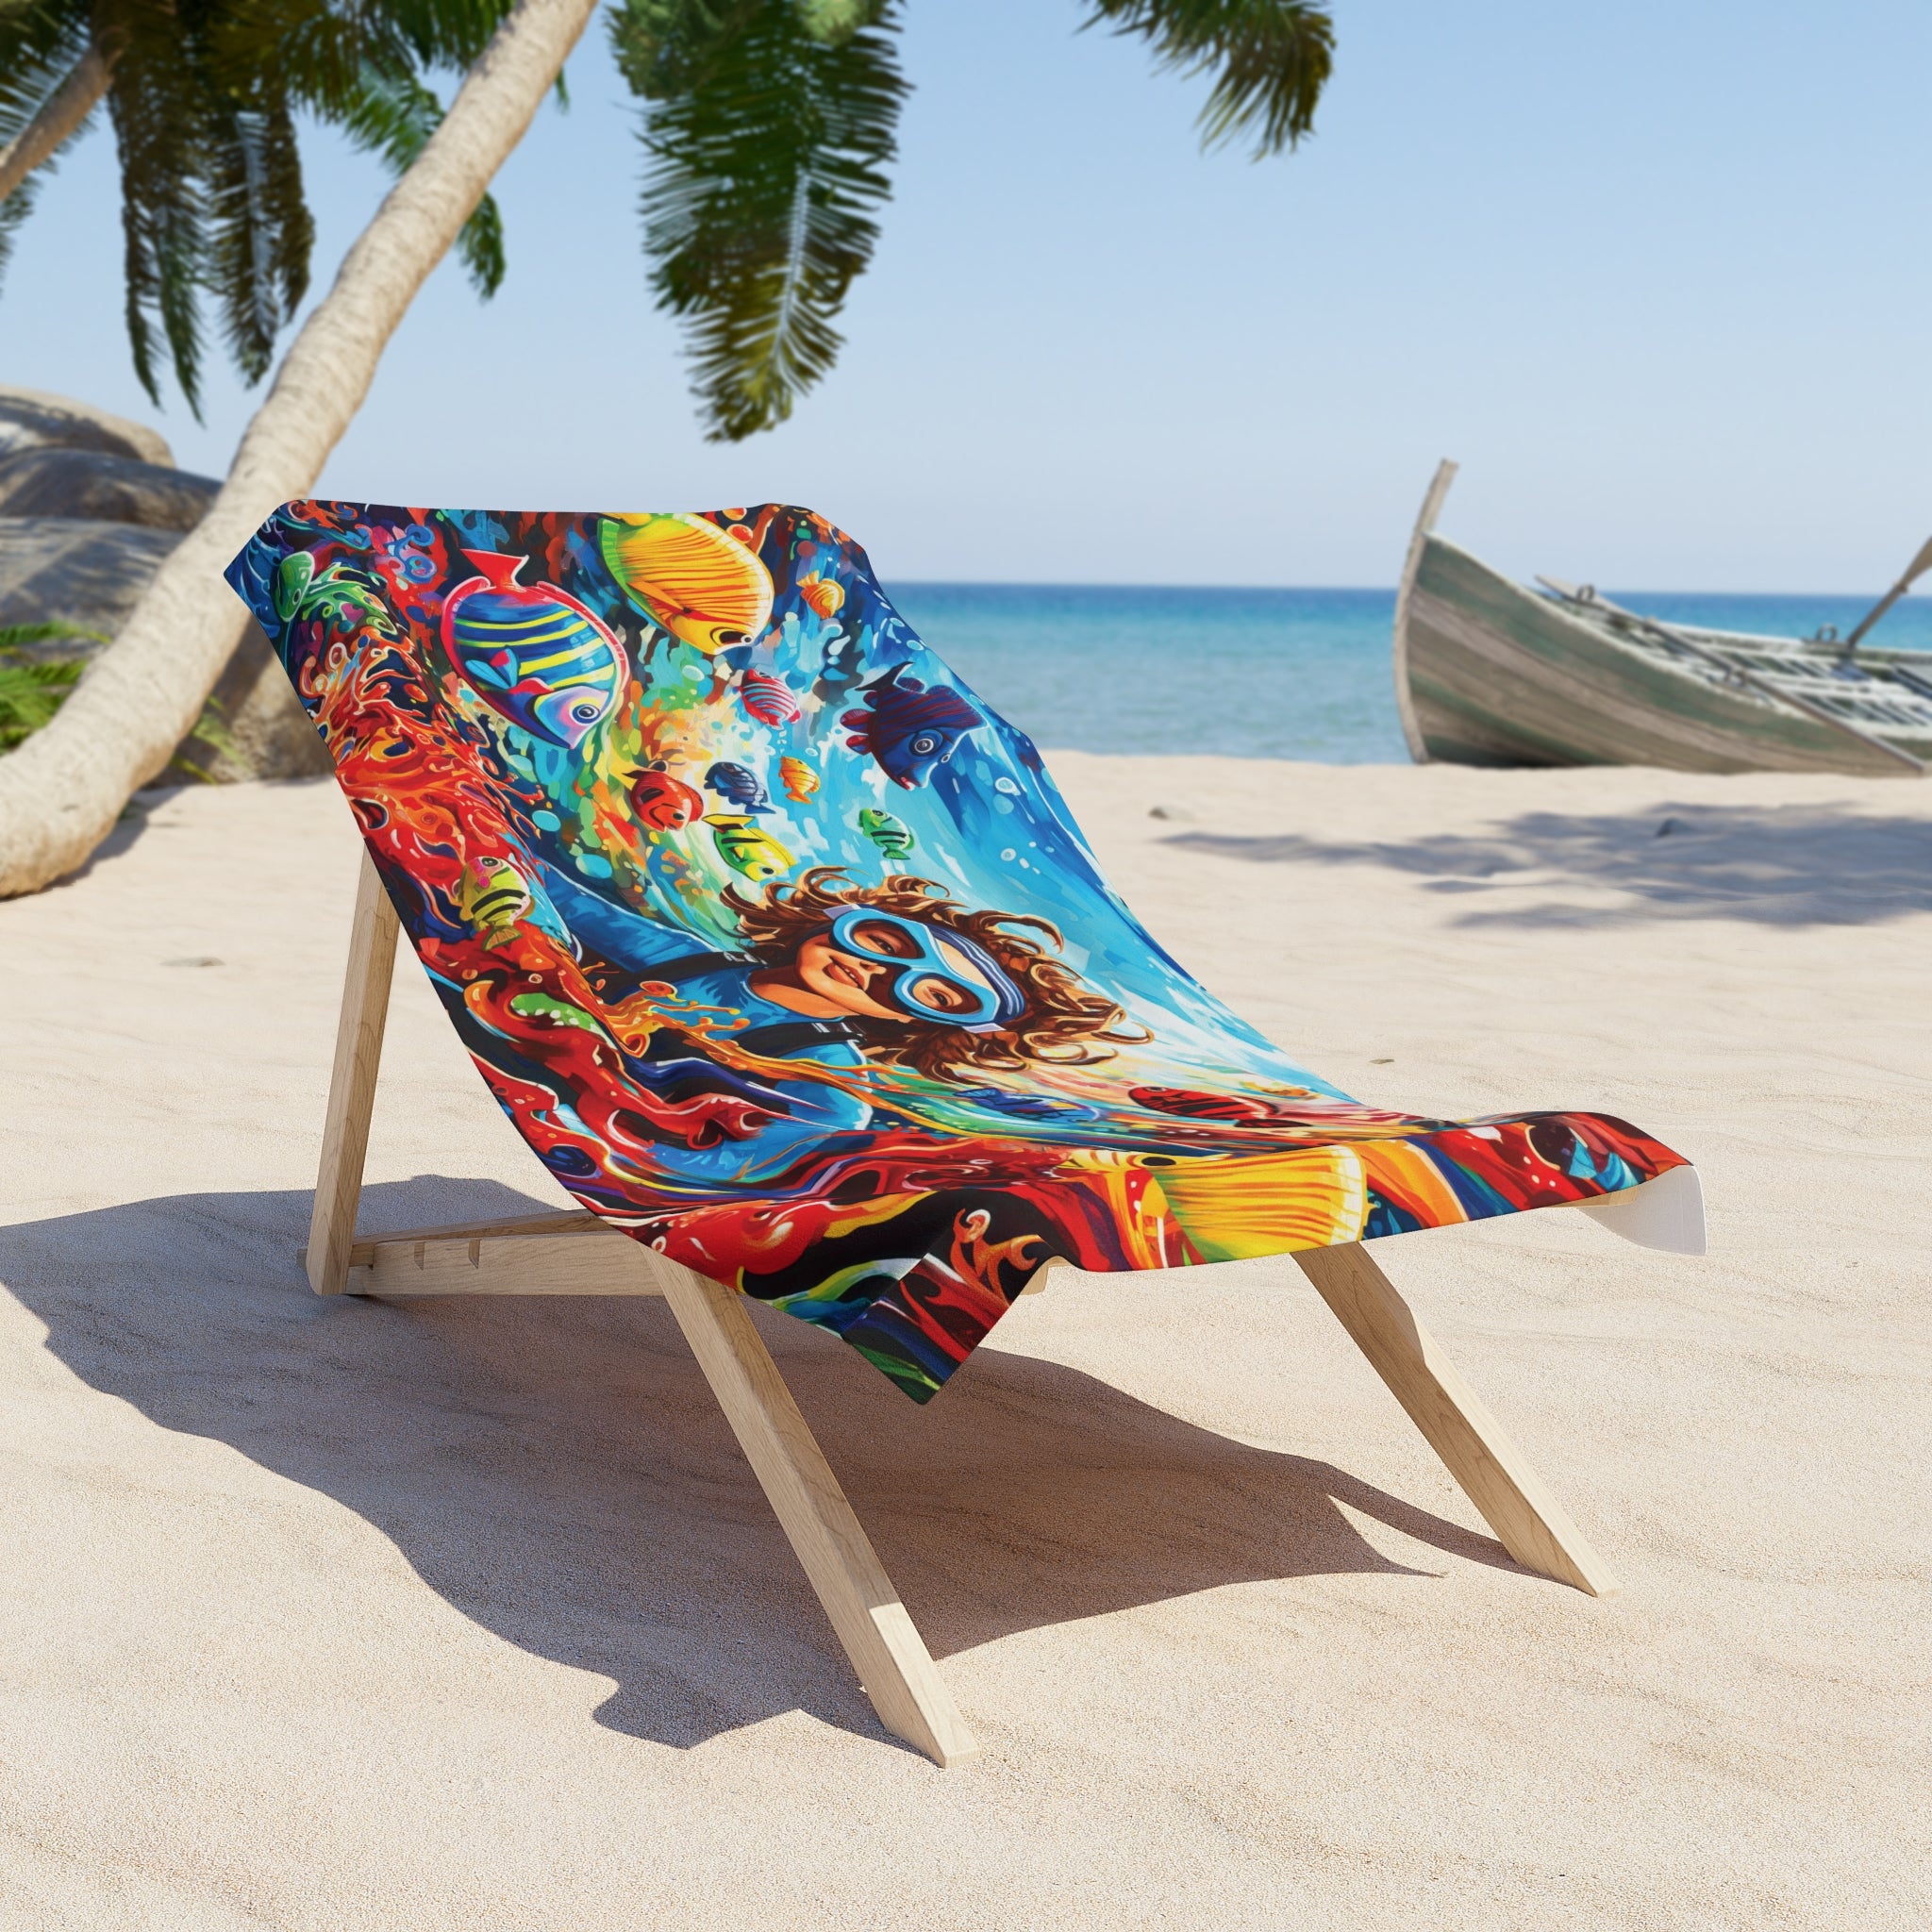 Swimming with the fish Beach Towel in two sizes